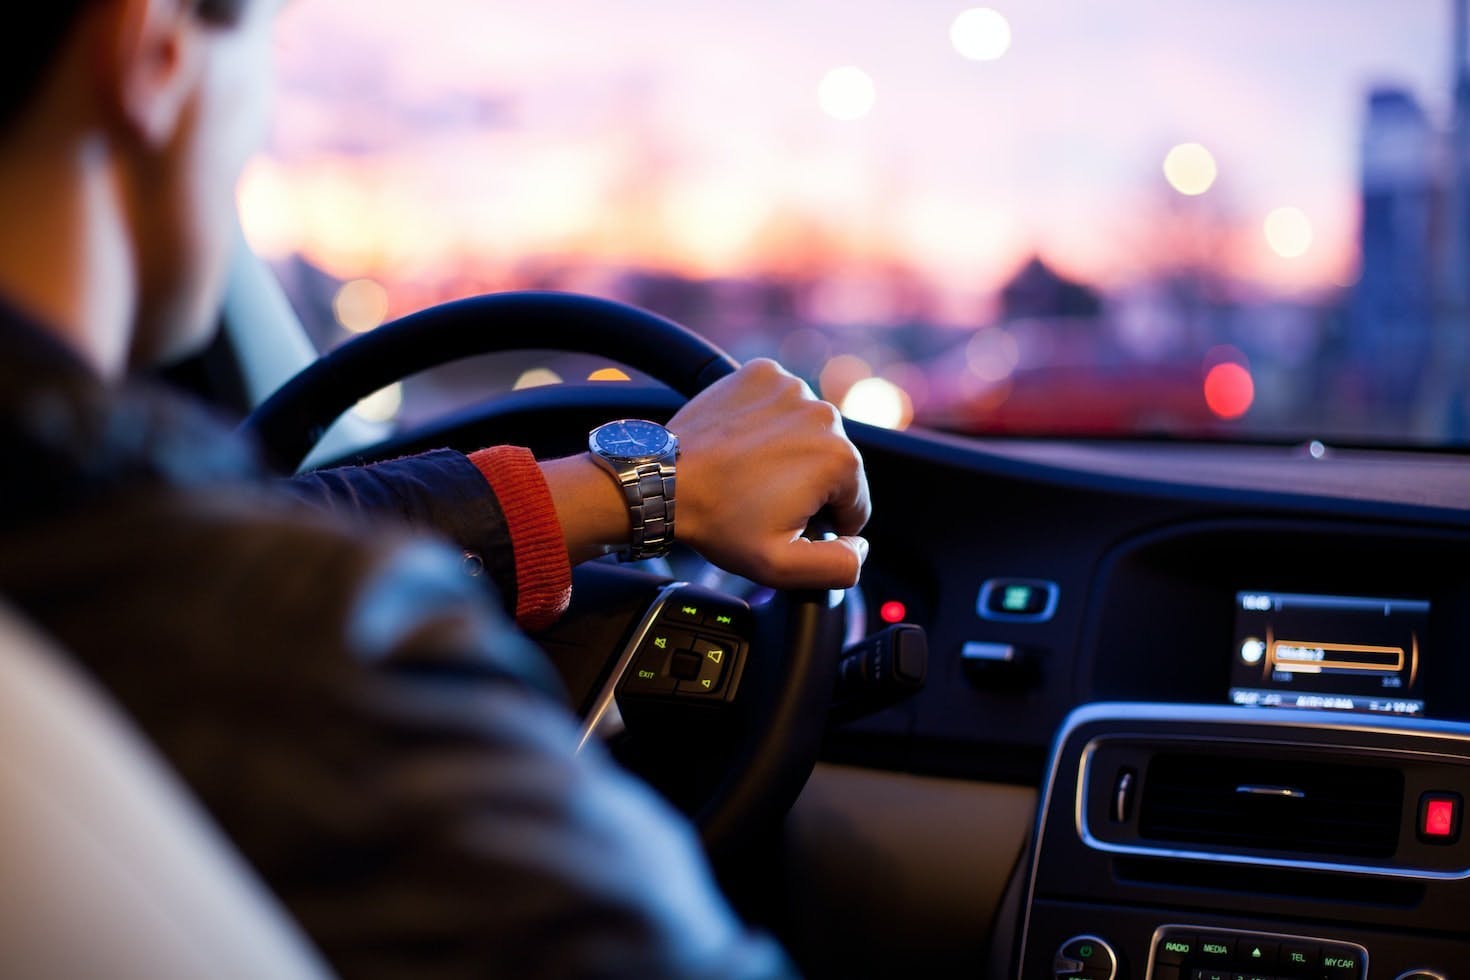 A person is driving a car at dusk, with one hand on the steering wheel, wearing a wristwatch, illuminated dashboard, and blurred city lights visible outside the windshield.